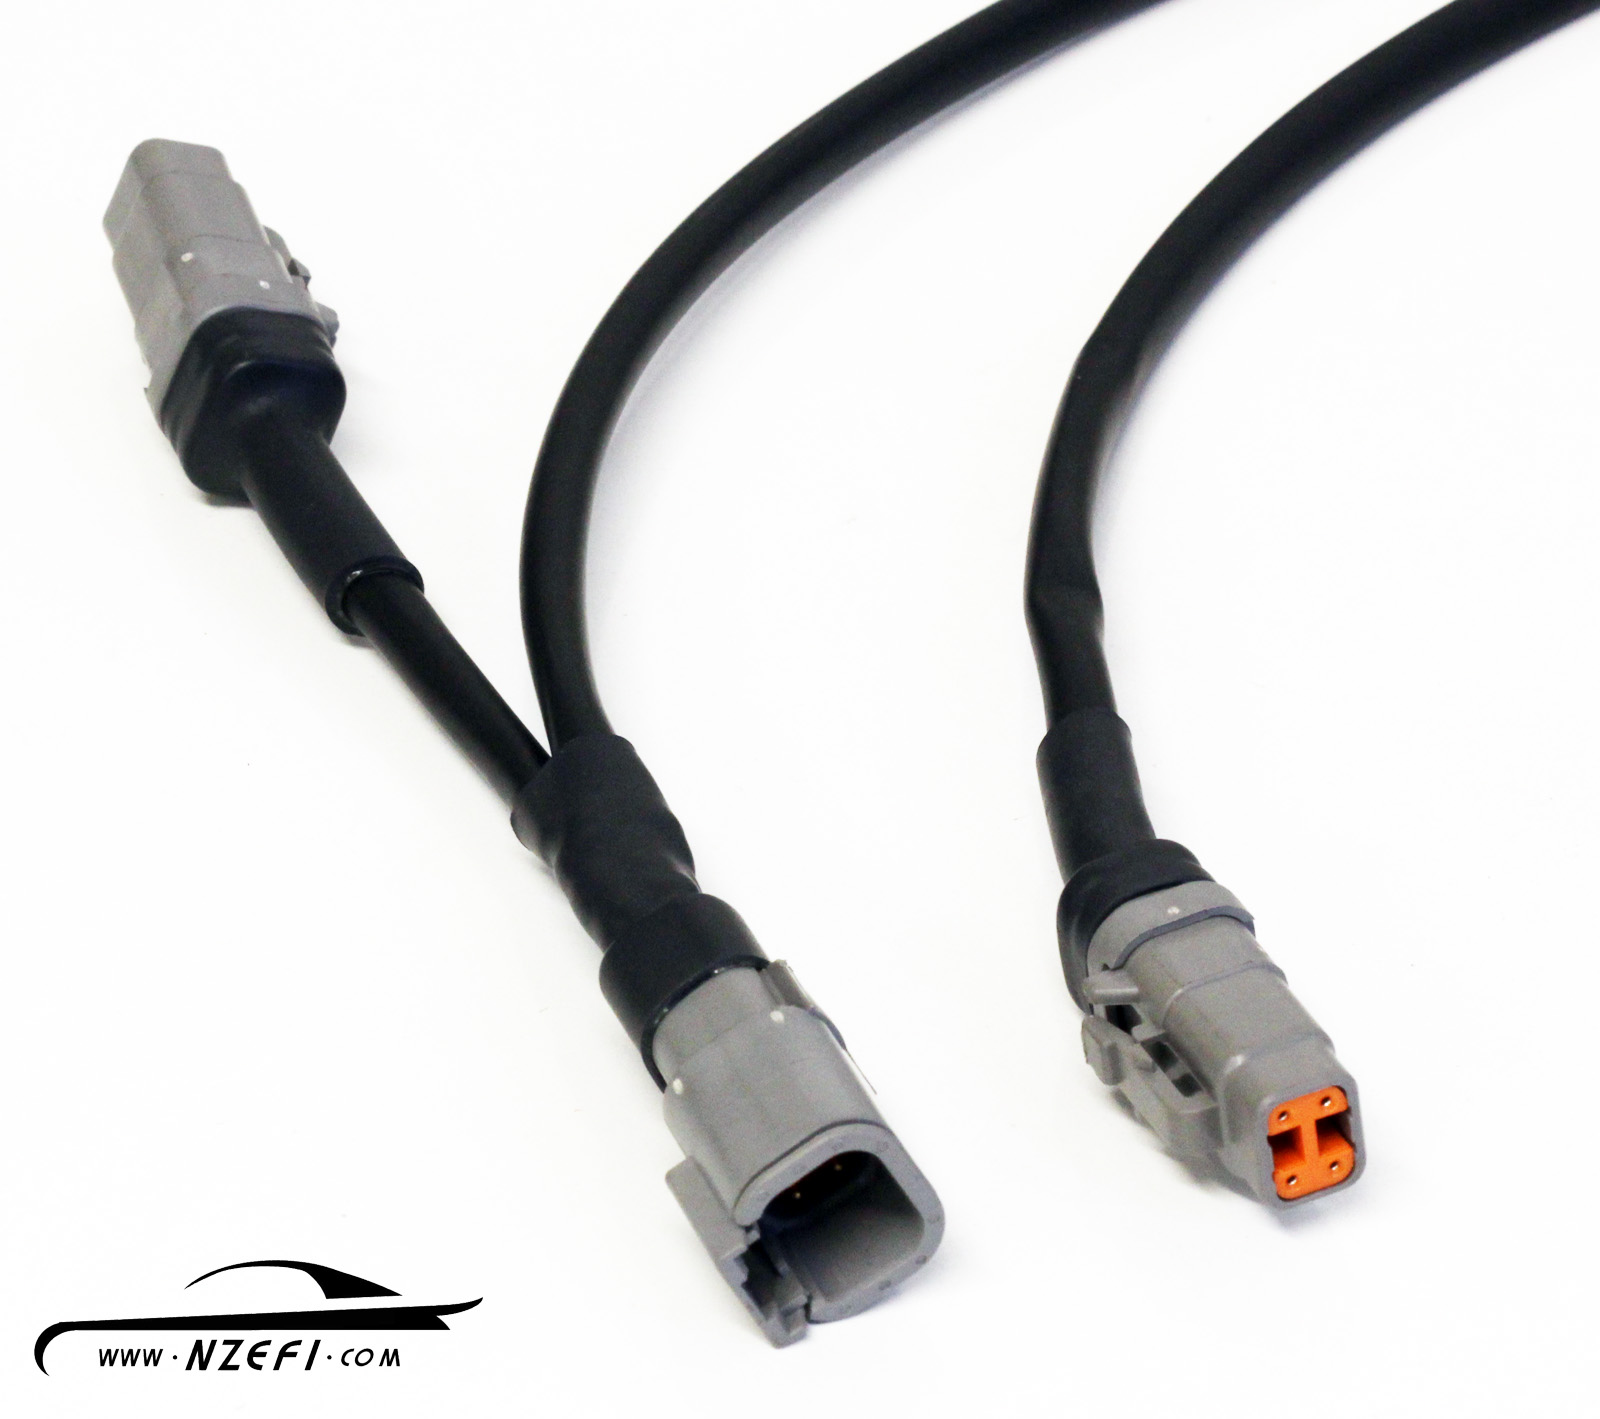 NZEFI Link G4 G4+ Dual Device CAN Extension Cable